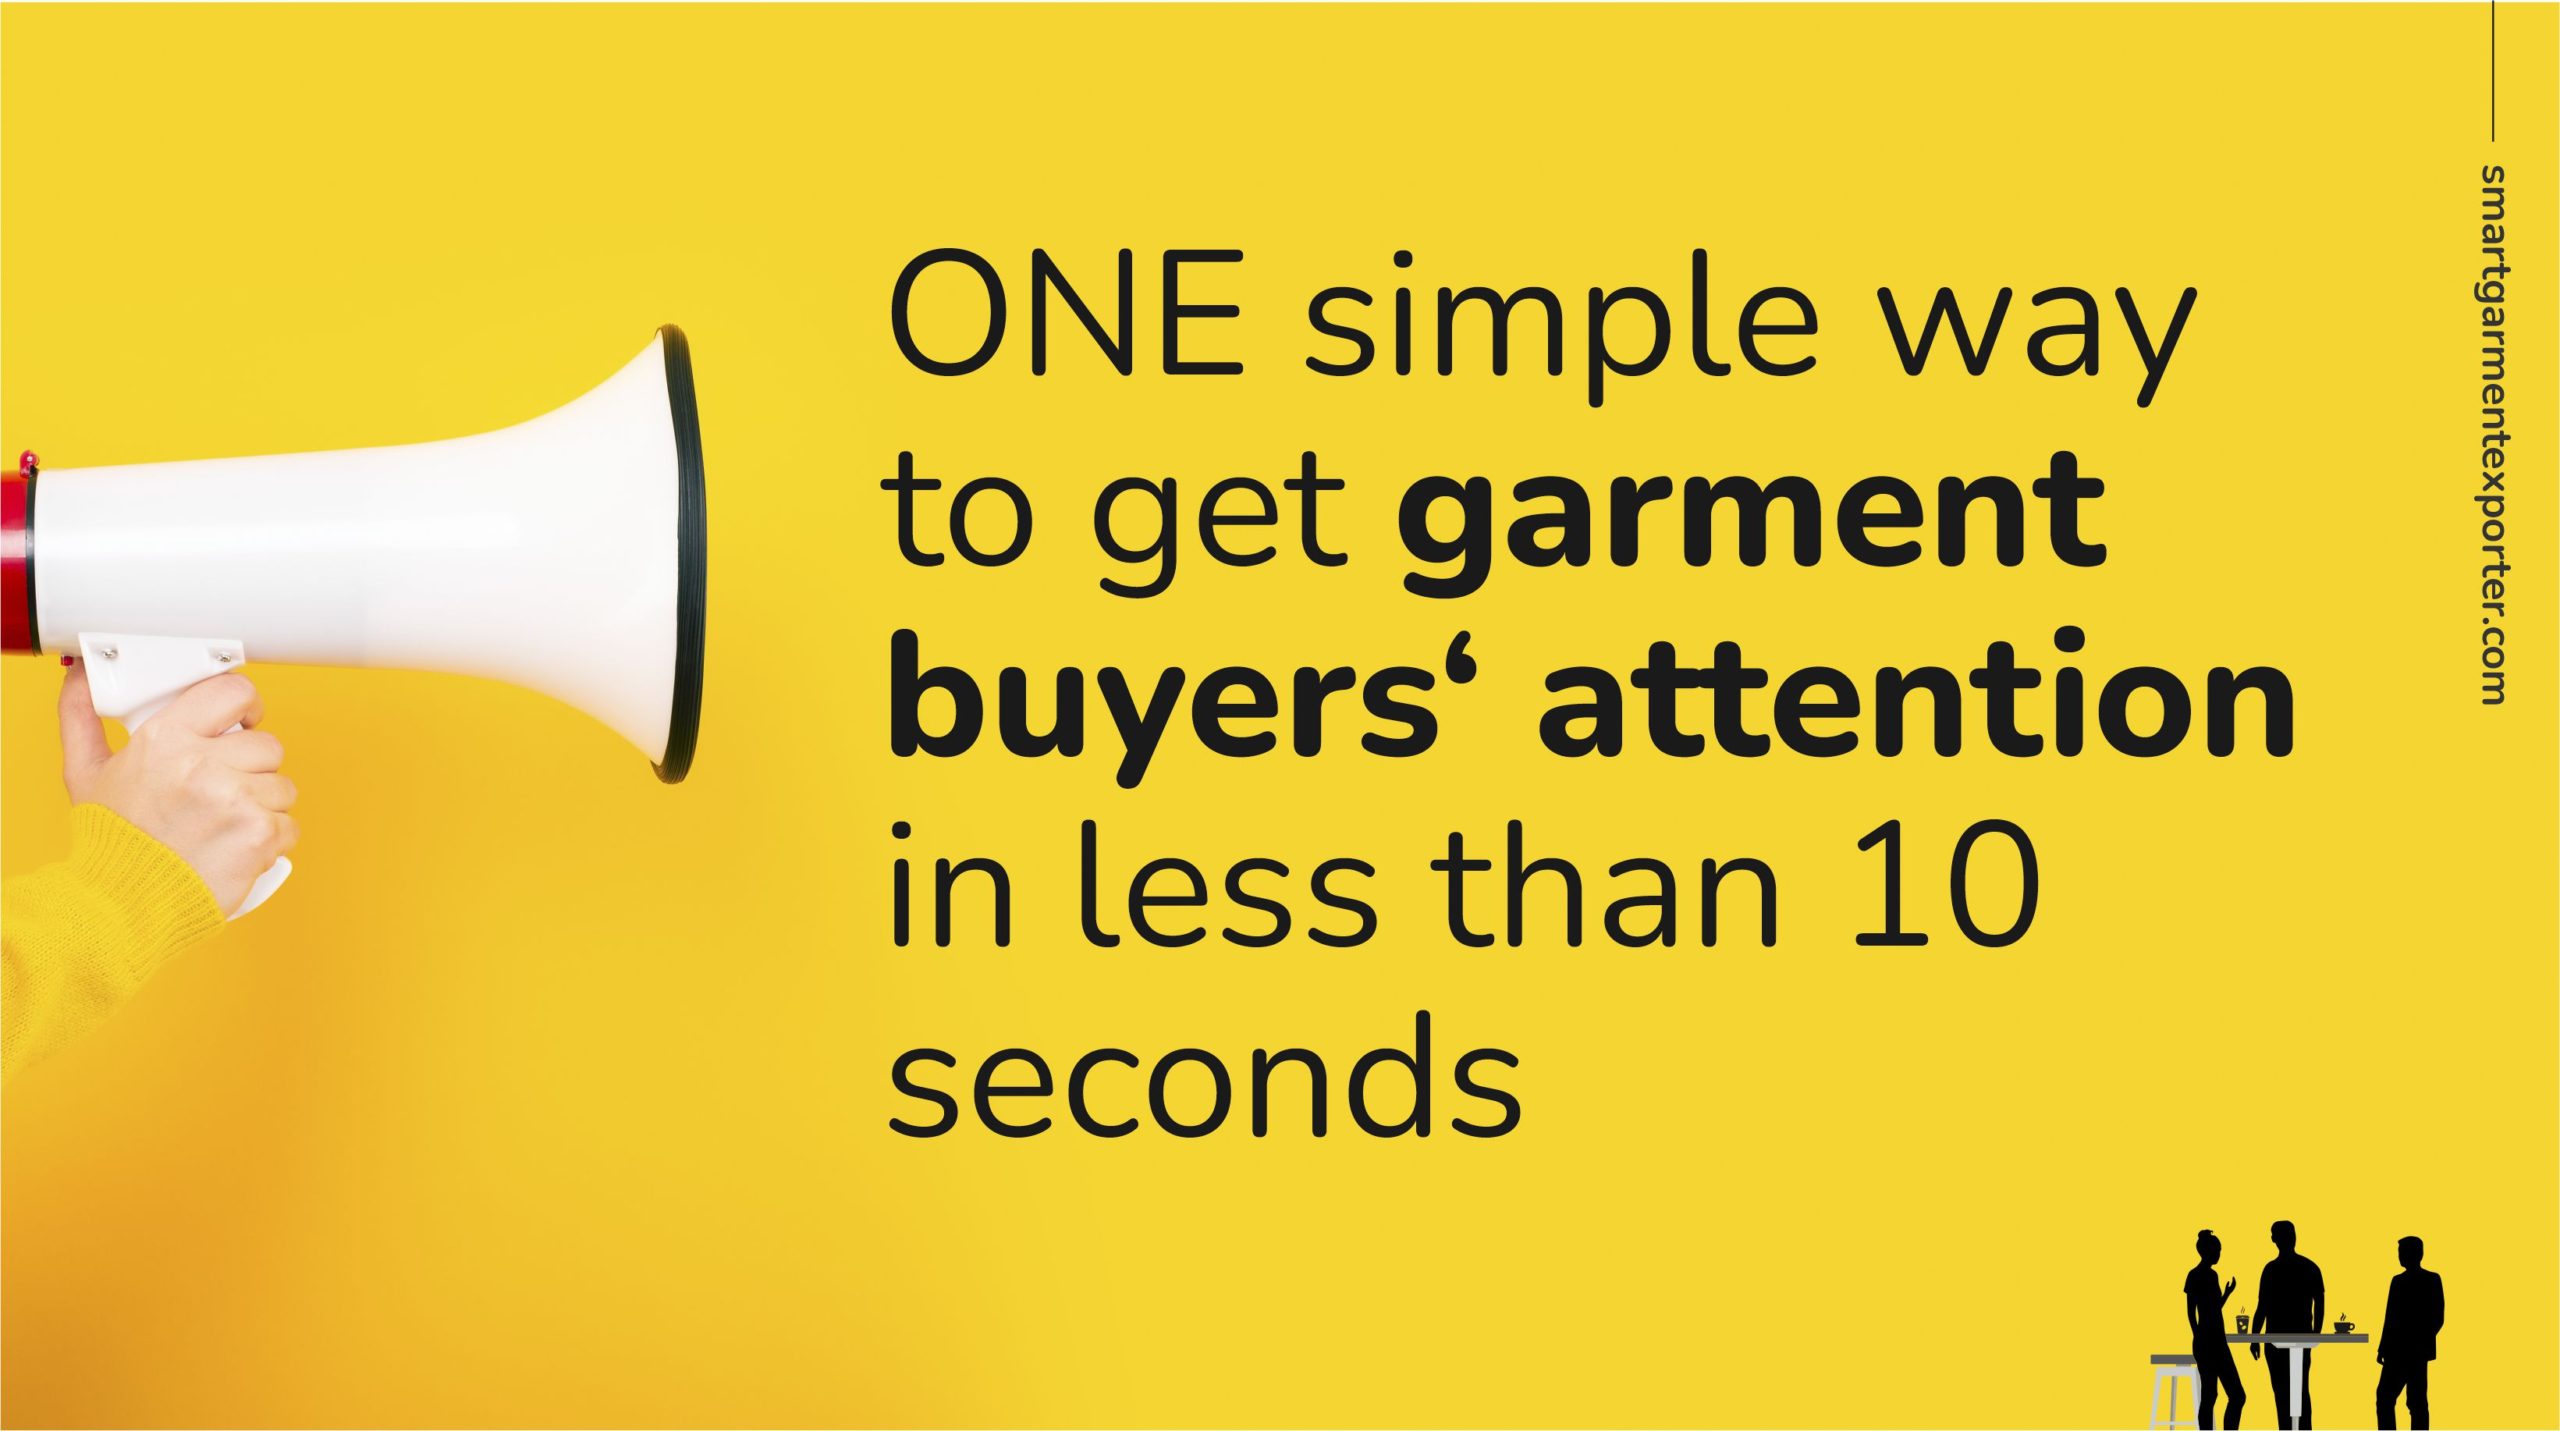 One simple way to get a garment buyer’s attention in less than 10 seconds